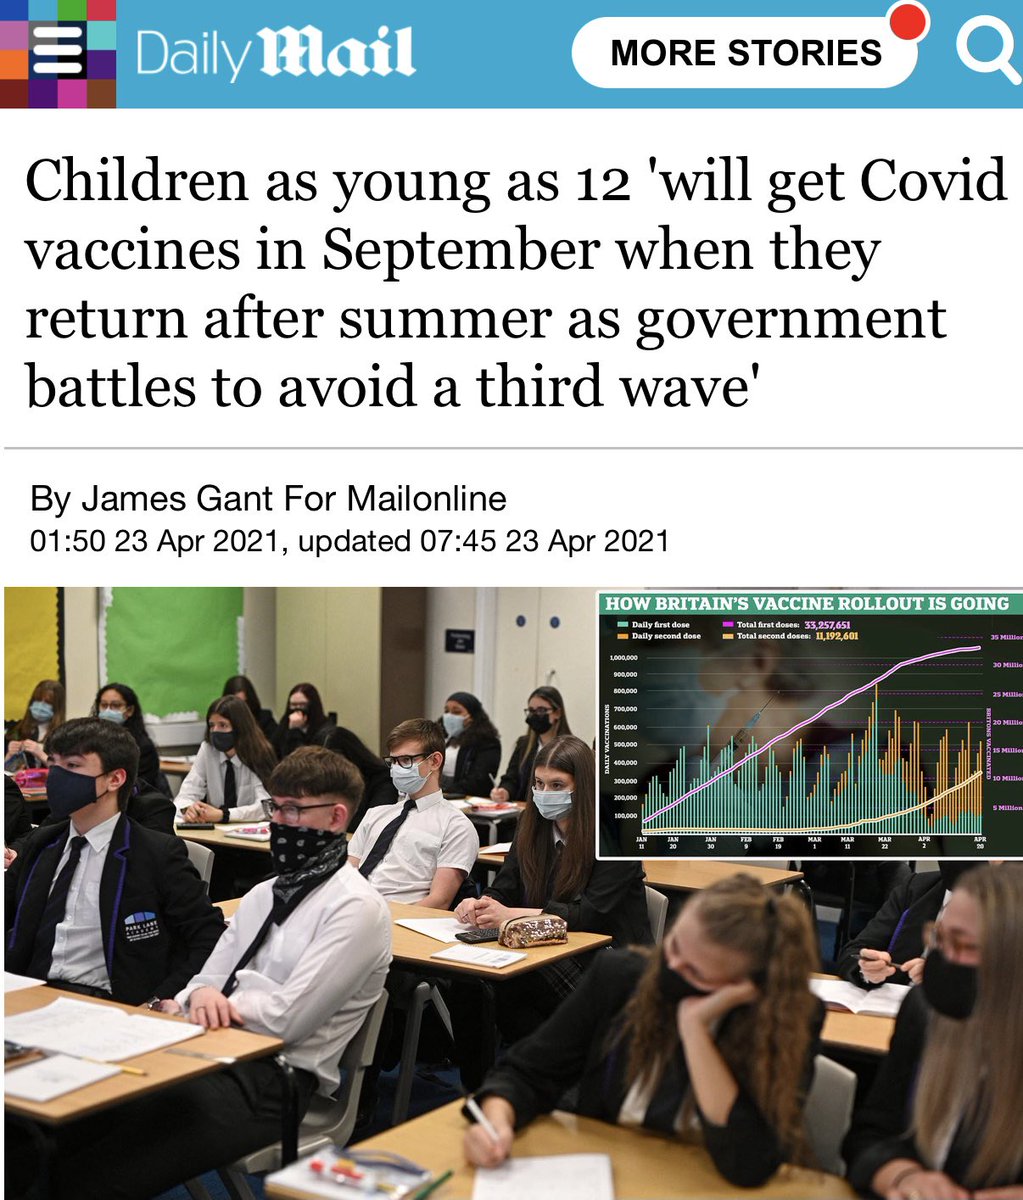 2. They are coming for your kidsGovernment wants to jab your kids - possibly from 5 + above - with trial gene drugs...not once but 3-4 times a year every year for lifeDoes this make kids GM-kids? #CrimeAgainstChildren  #LeaveOurKidsAlone #DoNotConsent @KathyConWom  @BreesAnna  https://twitter.com/kathyconwom/status/1385501284065742848